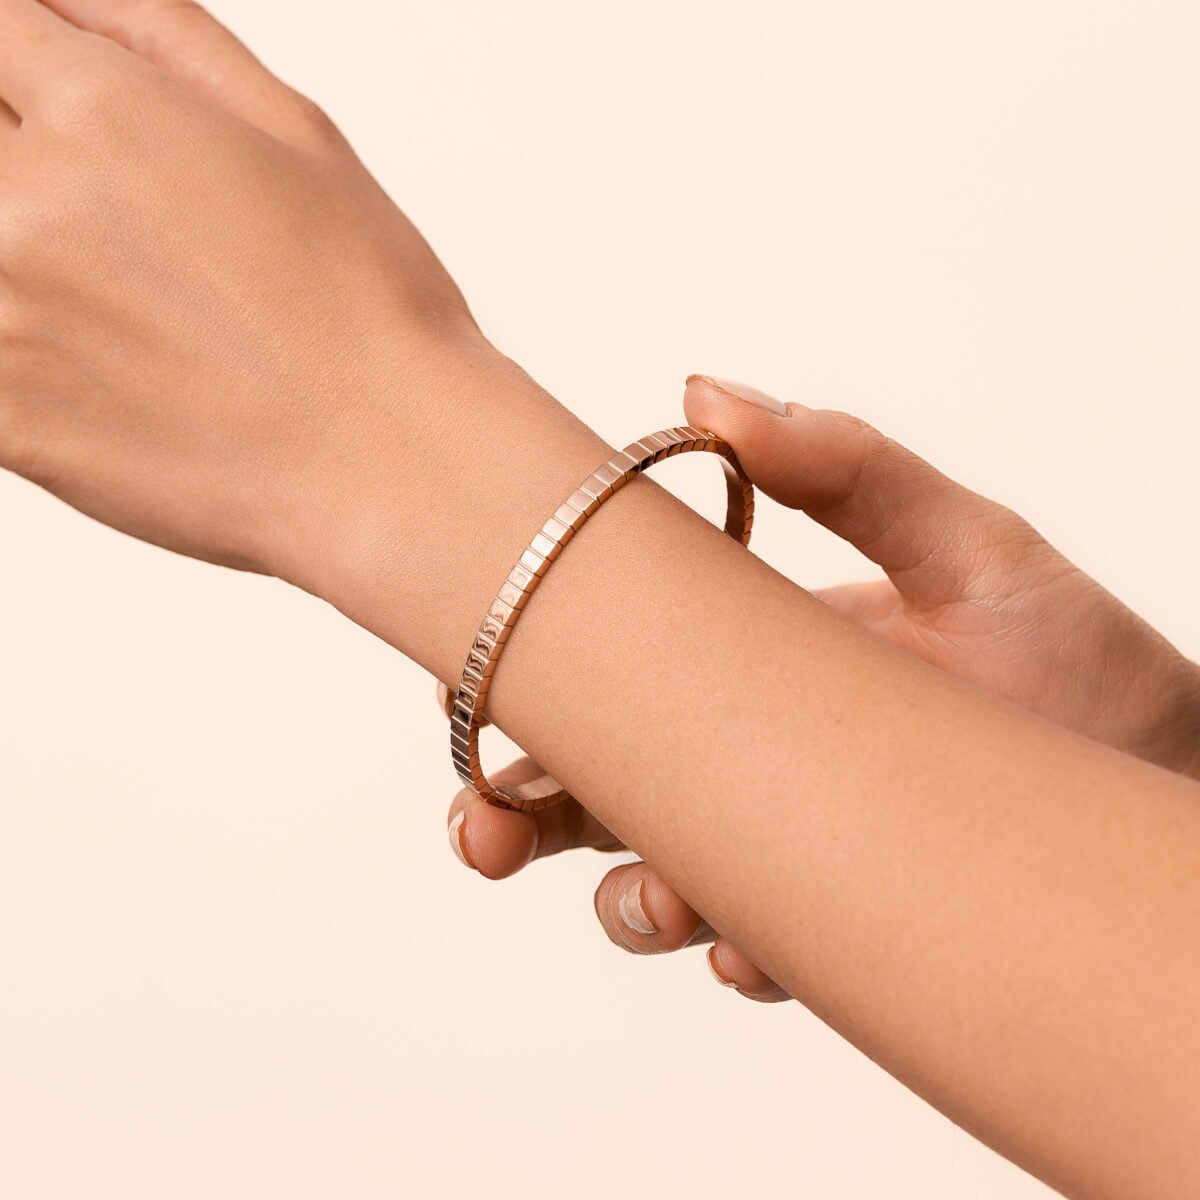 https://m.clubbella.co/product/ice-cube-rose-gold-bangle/ Ice cube Rose Gold Bangle (2)